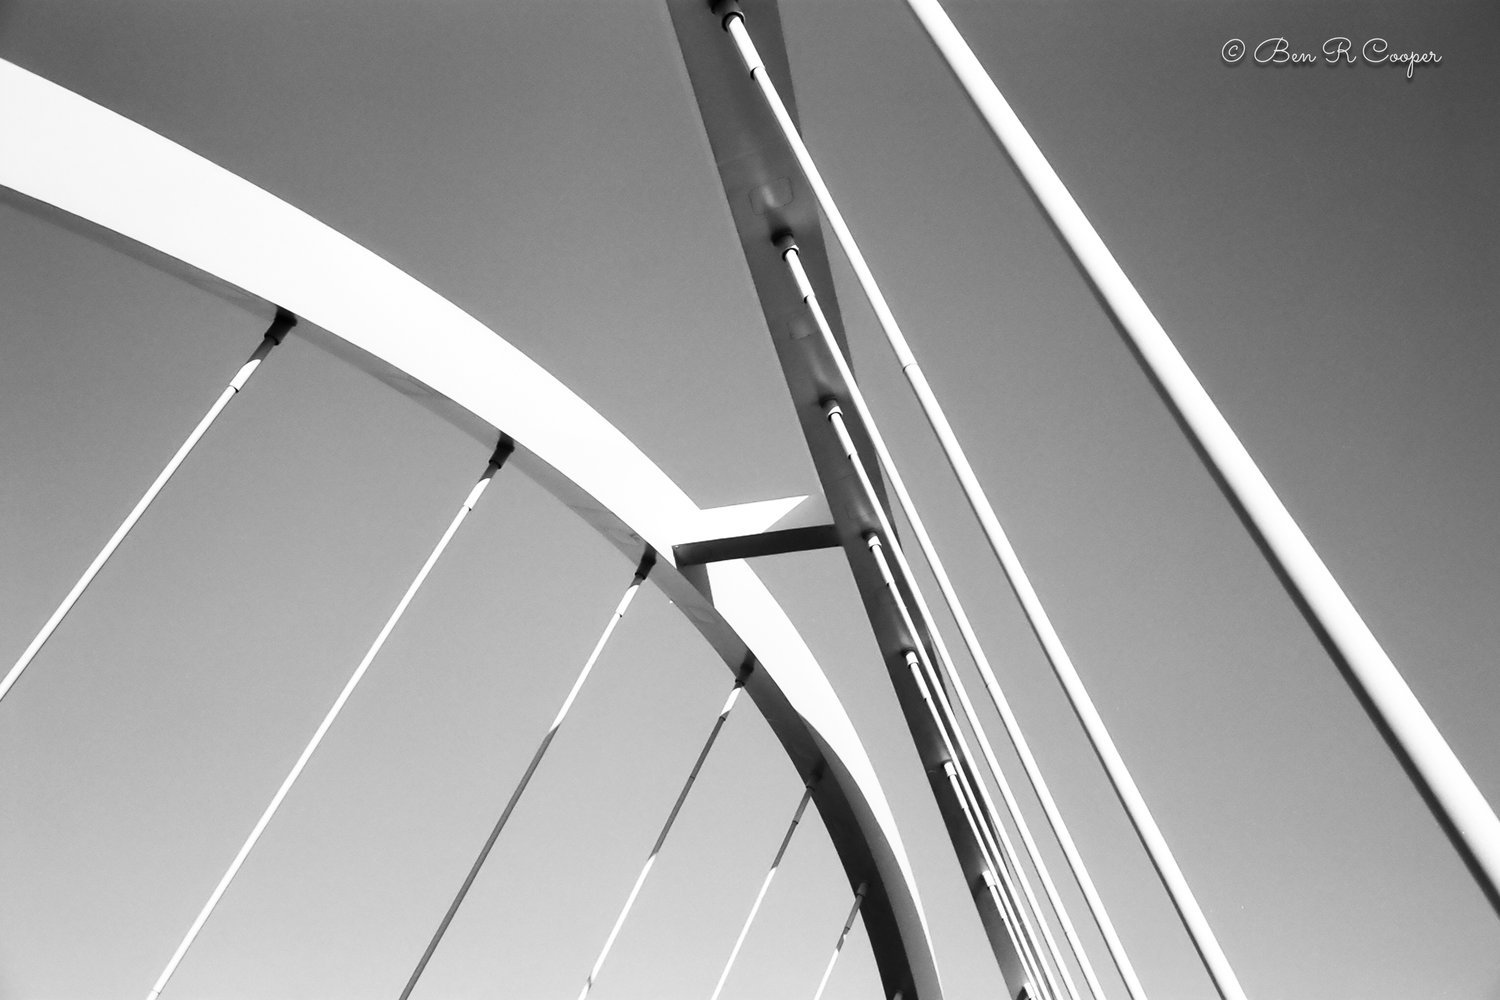 Looking up at the Lowry Avenue Bridge